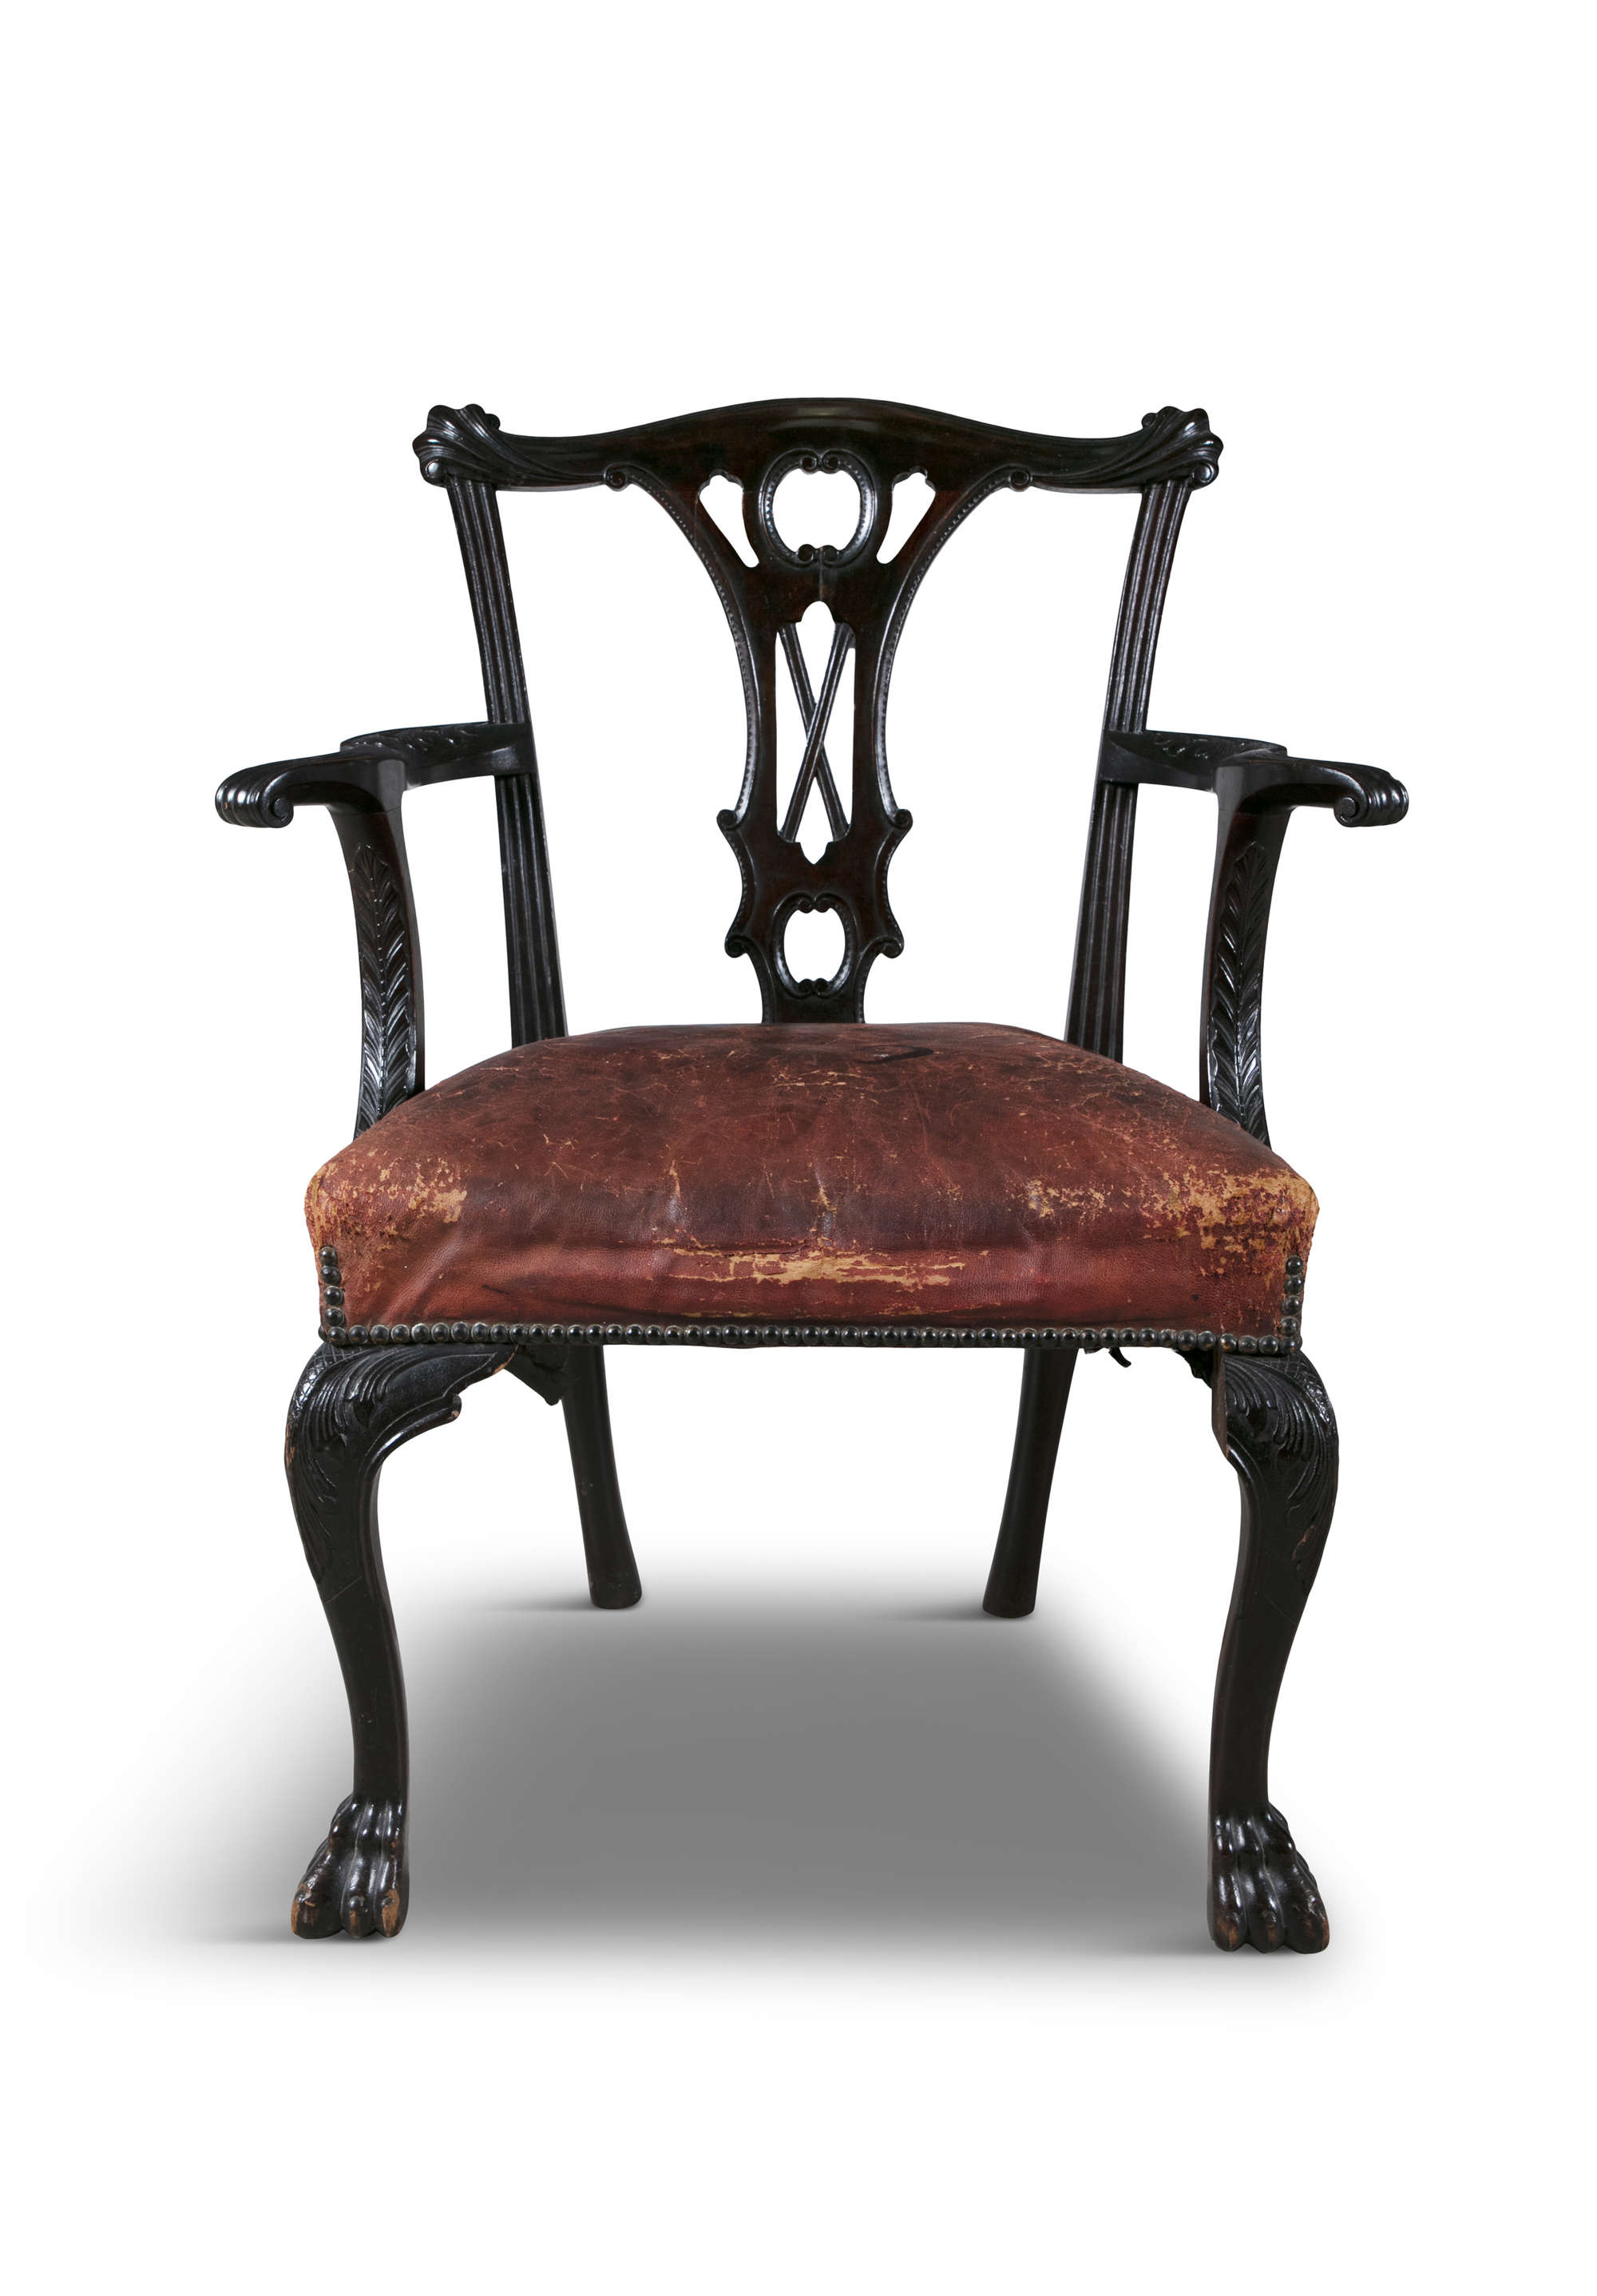 PAIR DUBLIN CHIPPENDALE ELBOW CHAIRS - Image 3 of 3